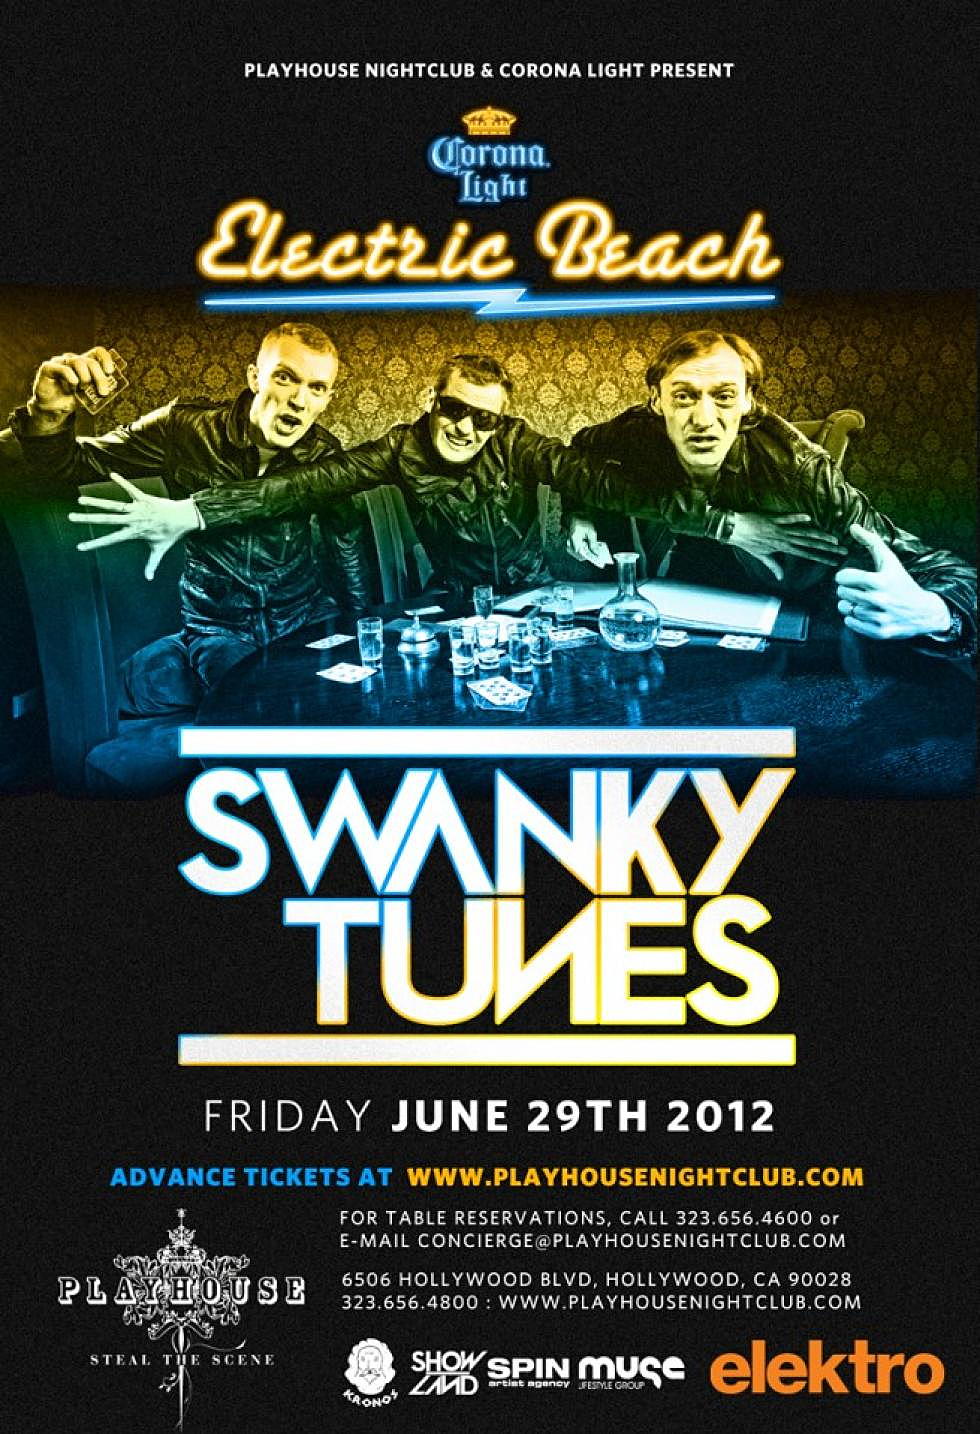 Swanky Tunes @ Electric Beach x Playhouse Nightclub June 29th + Contest to win tons of Prizes